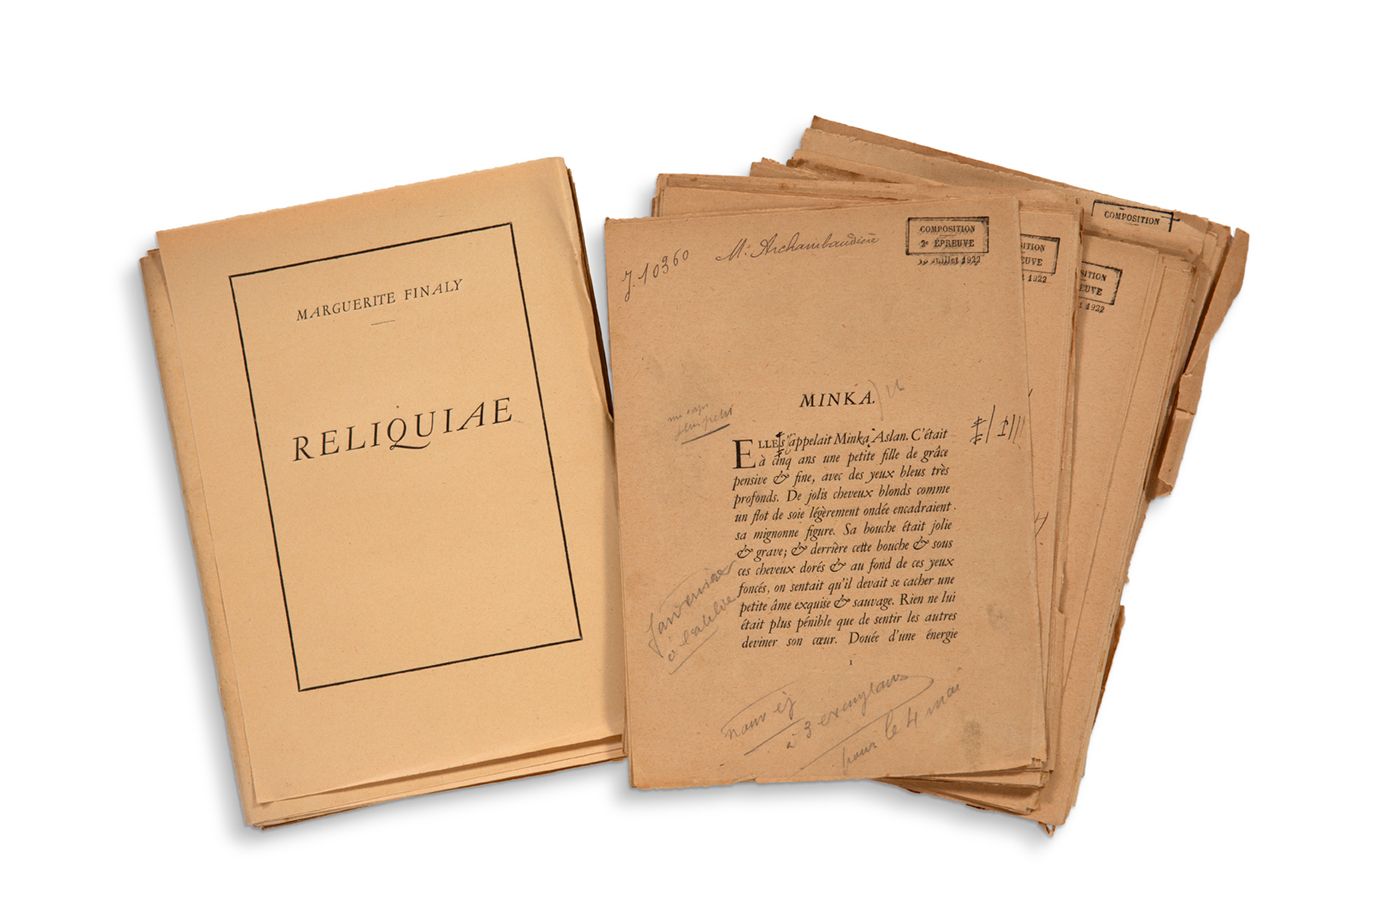 FINALY Marguerite († 1921) Proofs, [Reliquiae, 1925]; more than 300 leaves of va&hellip;